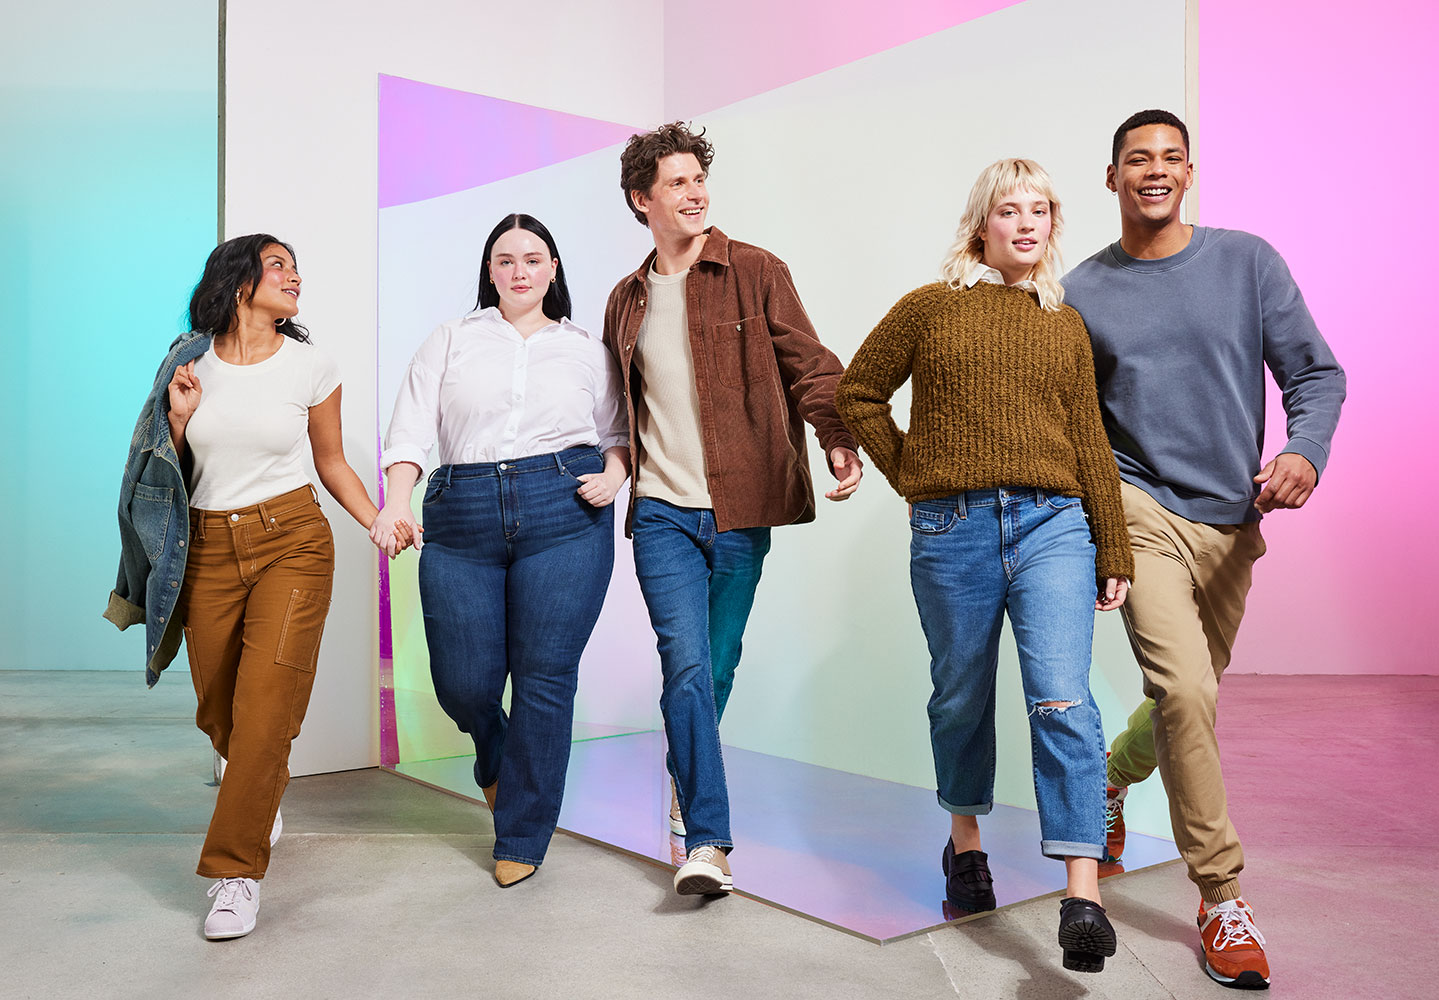 A group of people hold hands against a fluorescent colorful background. They wear Denizen by Levi Strauss products. Person on the left wears a white t-shirt, brown pants and sneakers. They have a blue denim jacket held over their shoulder. The next person wears a long sleeved white button-down tucked into blue jeans. The person in the middle wears a brown button up jacket over a white t-shirt with blue denim jeans. The next person has a white collar poking out of a brown sweater tucked into blue jeans with a rip on the right knee. They wear black loafer shoes. The person on the far right is wearing a long sleeve blue shirt and khaki pants with red sneakers. Photo by Julia Johnson.